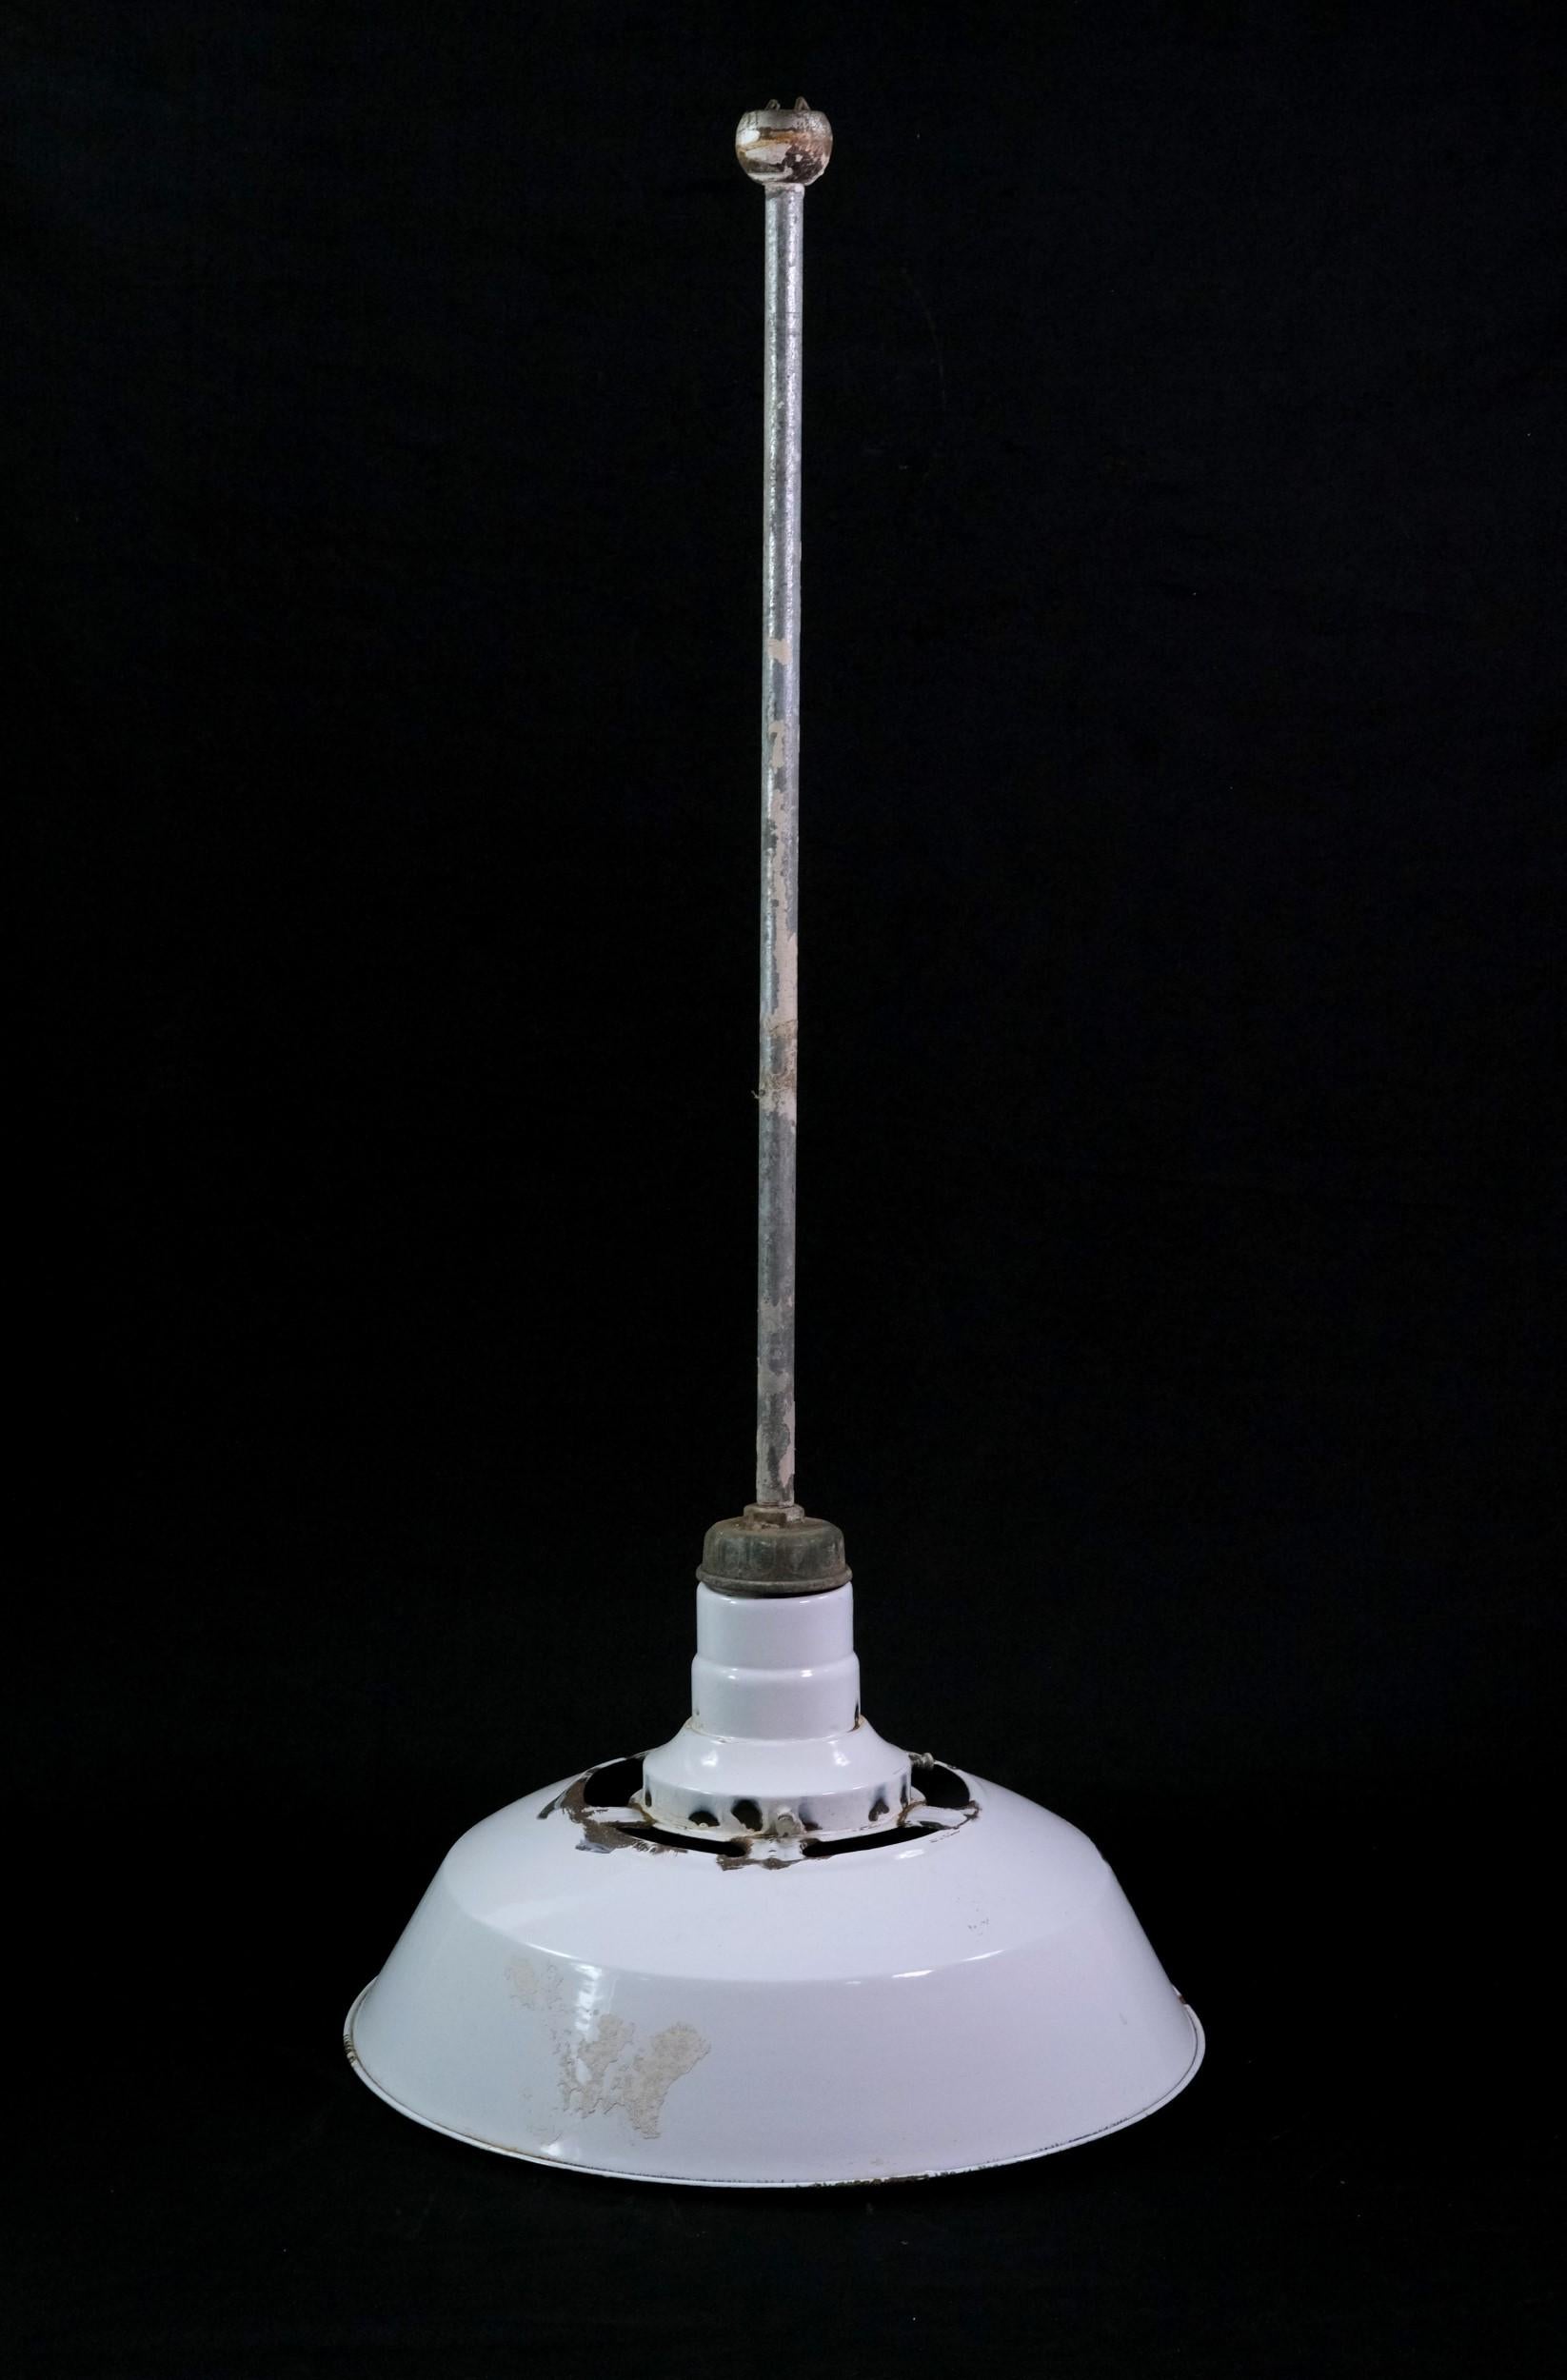 Mid-20th century industrial factory pendant light featuring a white enameled steel shade mounted to a steel pole and canopy. The shade has subtle black enamel around the bottom rim with moderate chipped paint. Small quantity available at time of